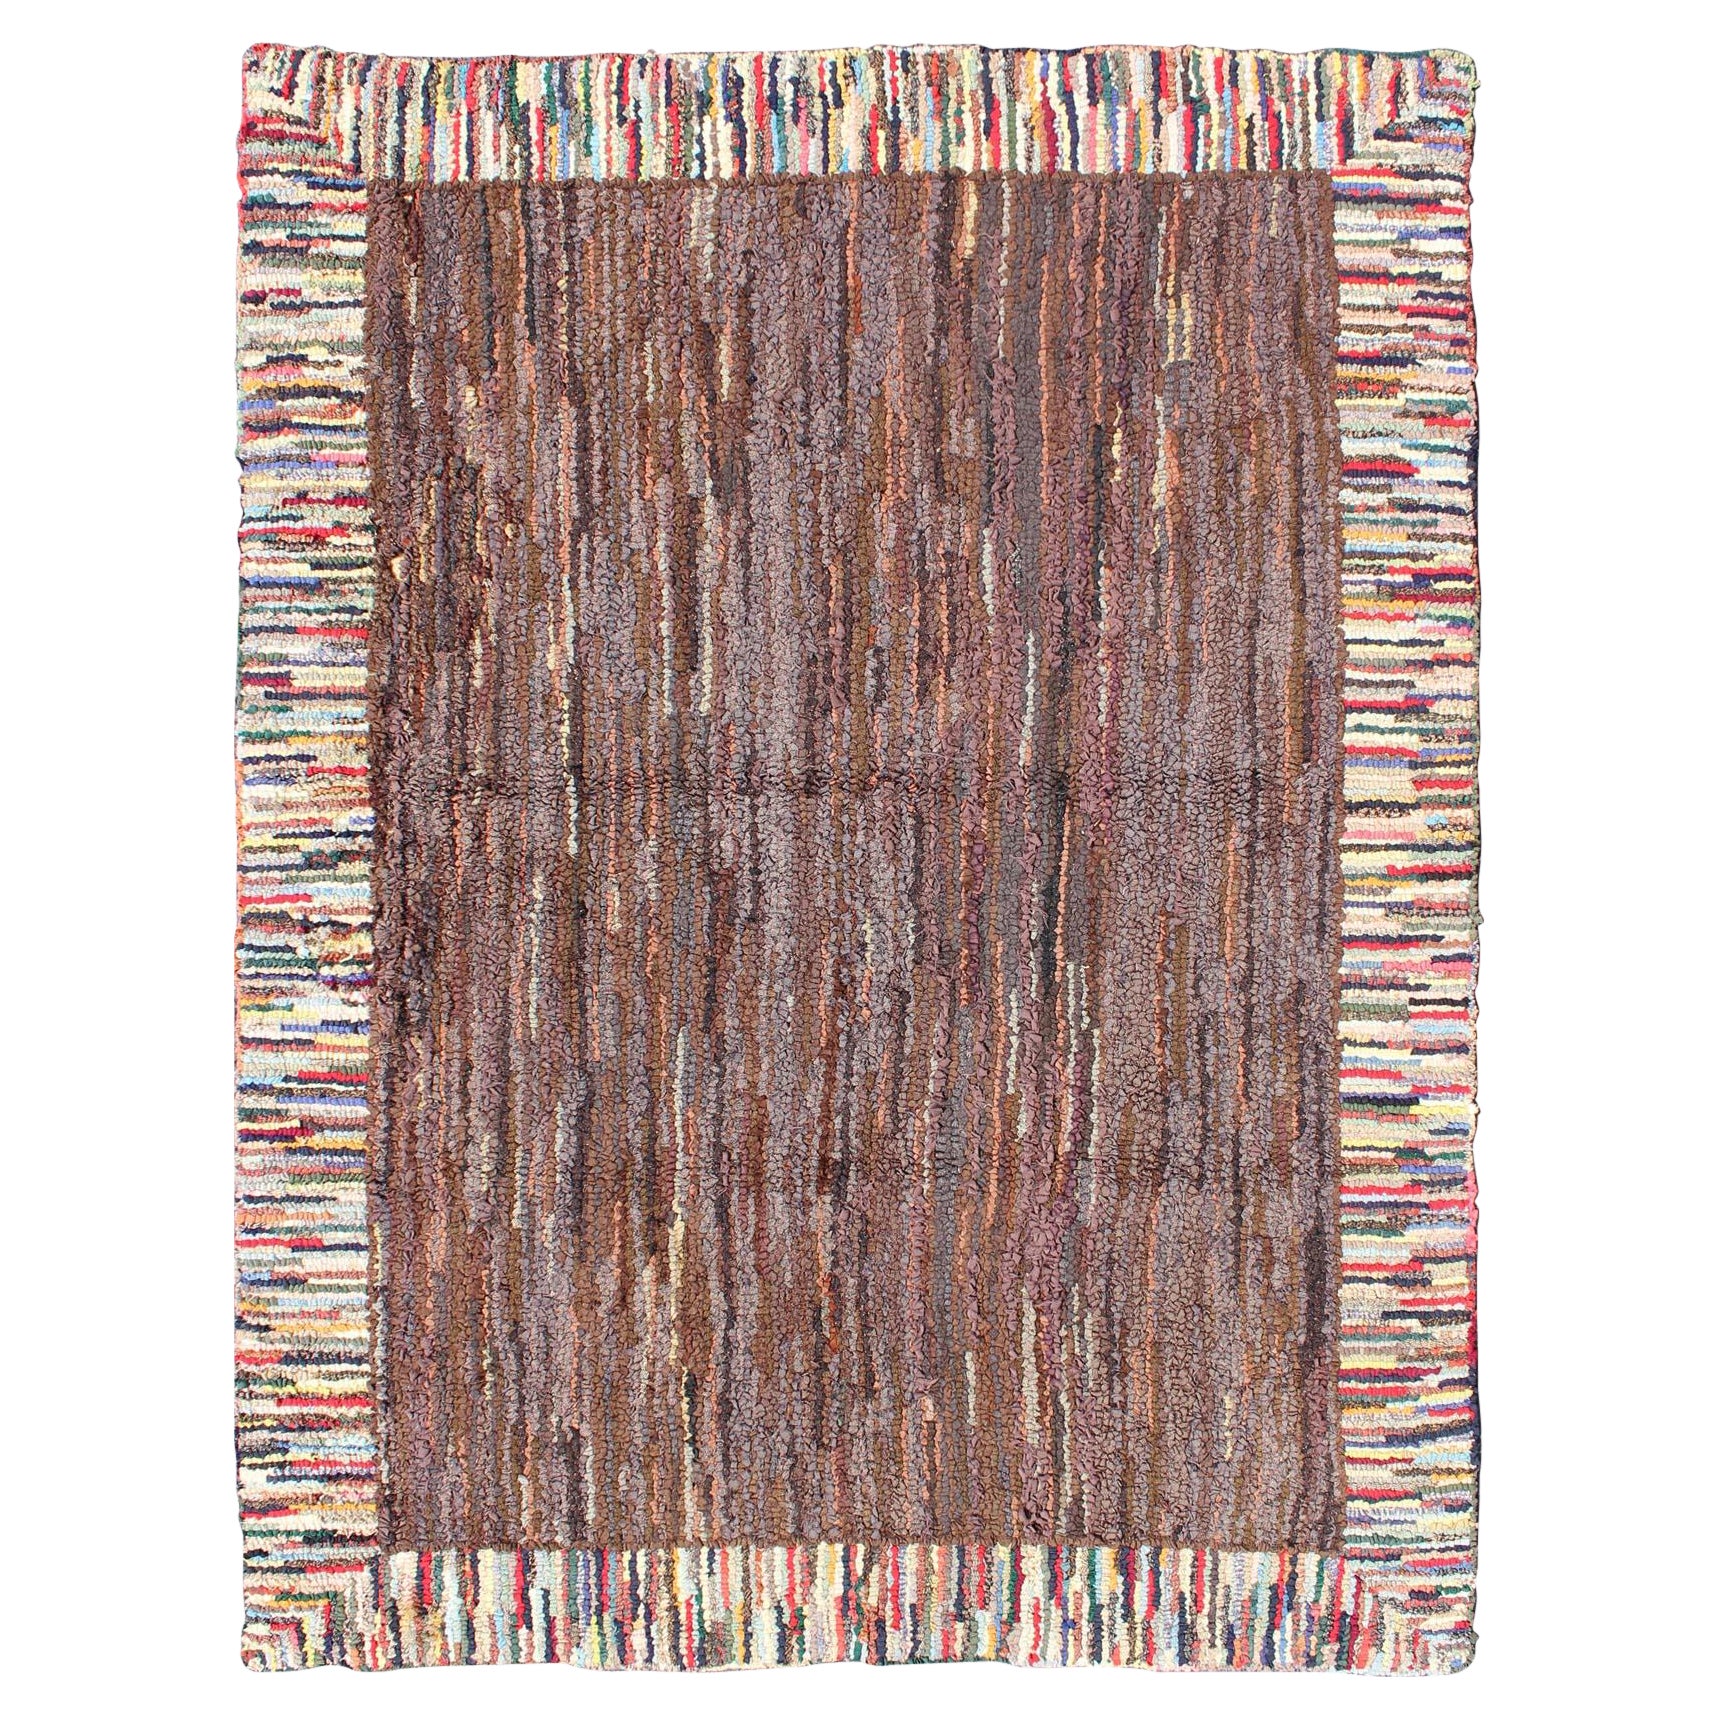 Antique American Hooked Rug with Colorful Variegated Design